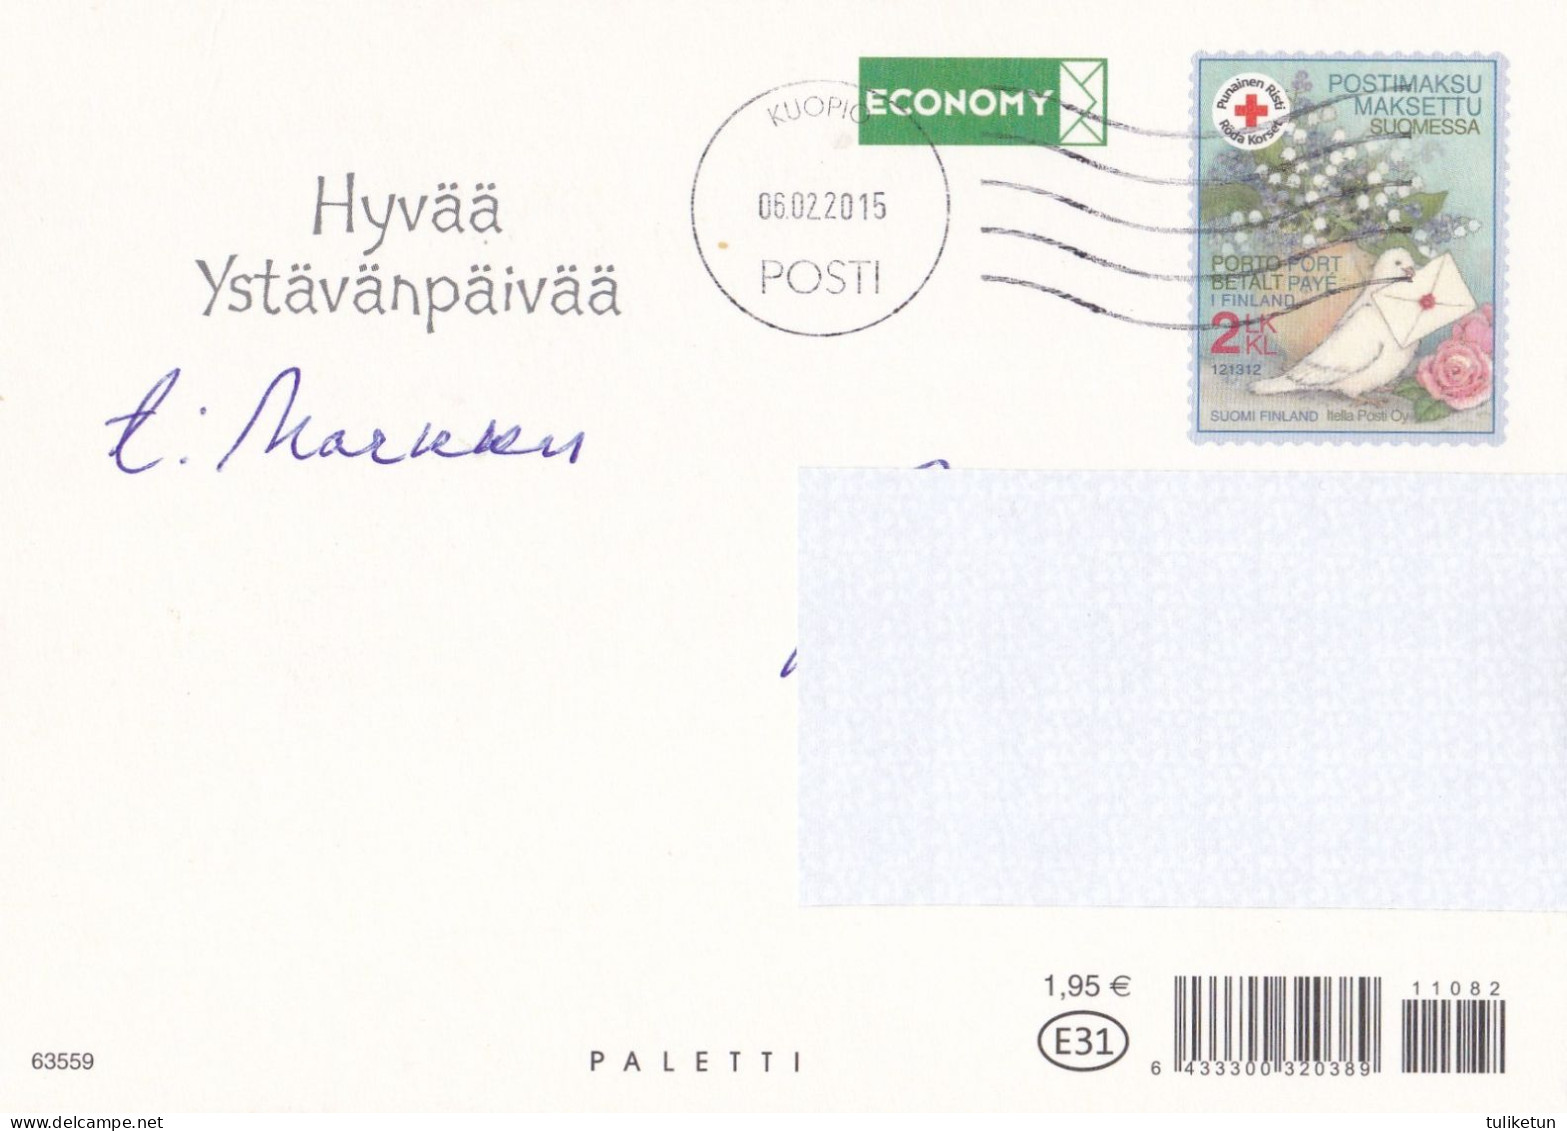 Postal Stationery - Flowers - Roses - Red Cross 2015 - Suomi Finland - Postage Paid - Postal Stationery